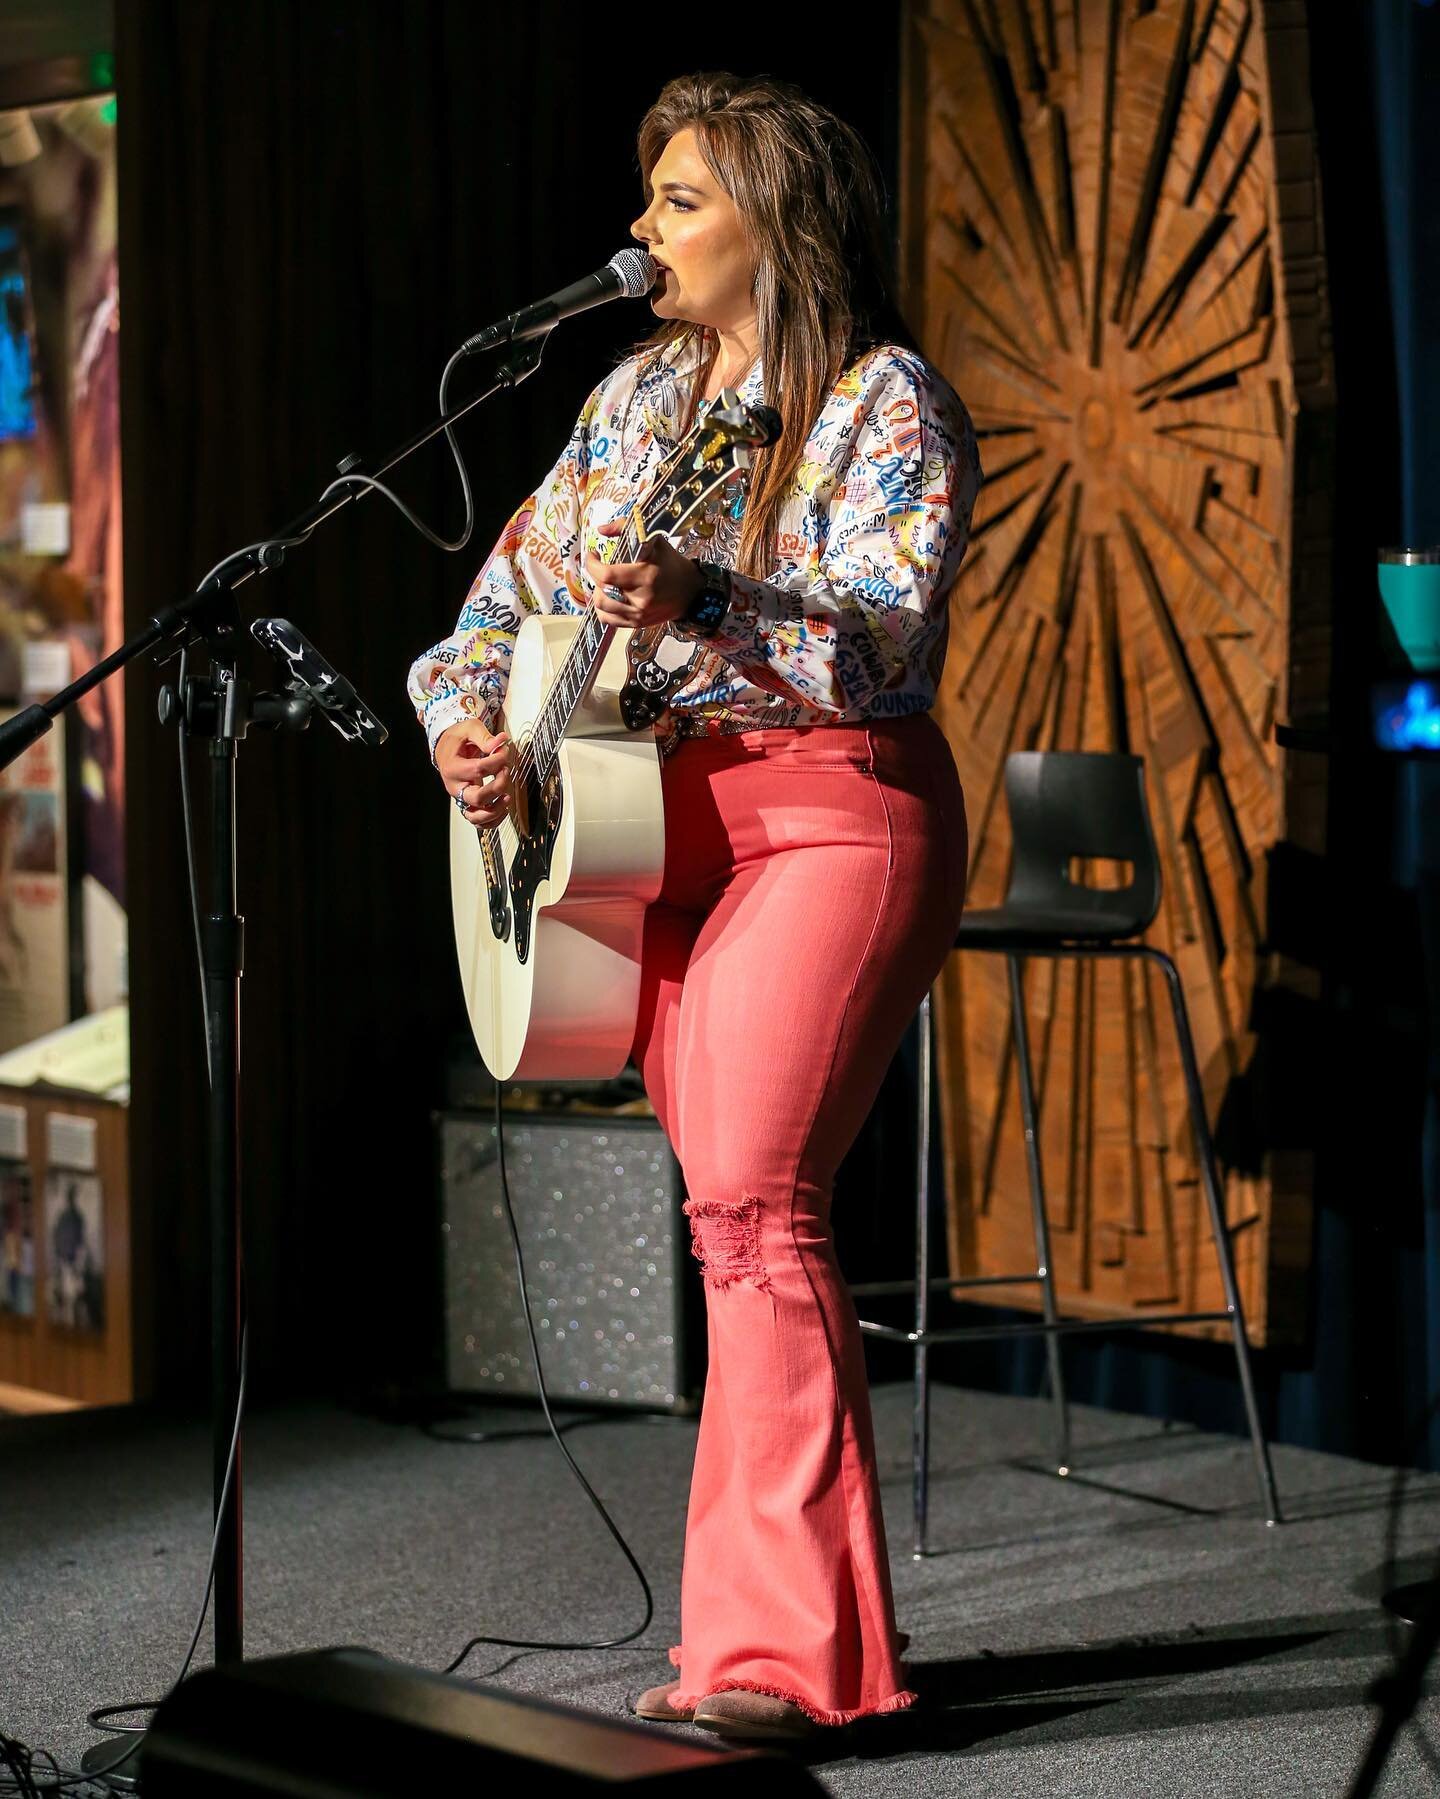 Singin&rsquo; or talkin&rsquo; ? This one is always a toss up with me! Take me back to CMA fest! 

#cma #cmafest #cmafest2022 #glencampbellmuseum #nashville #musician #countrymusic #countrysinger #singersongwriter #tour #show #style #gibson #gibsoncu